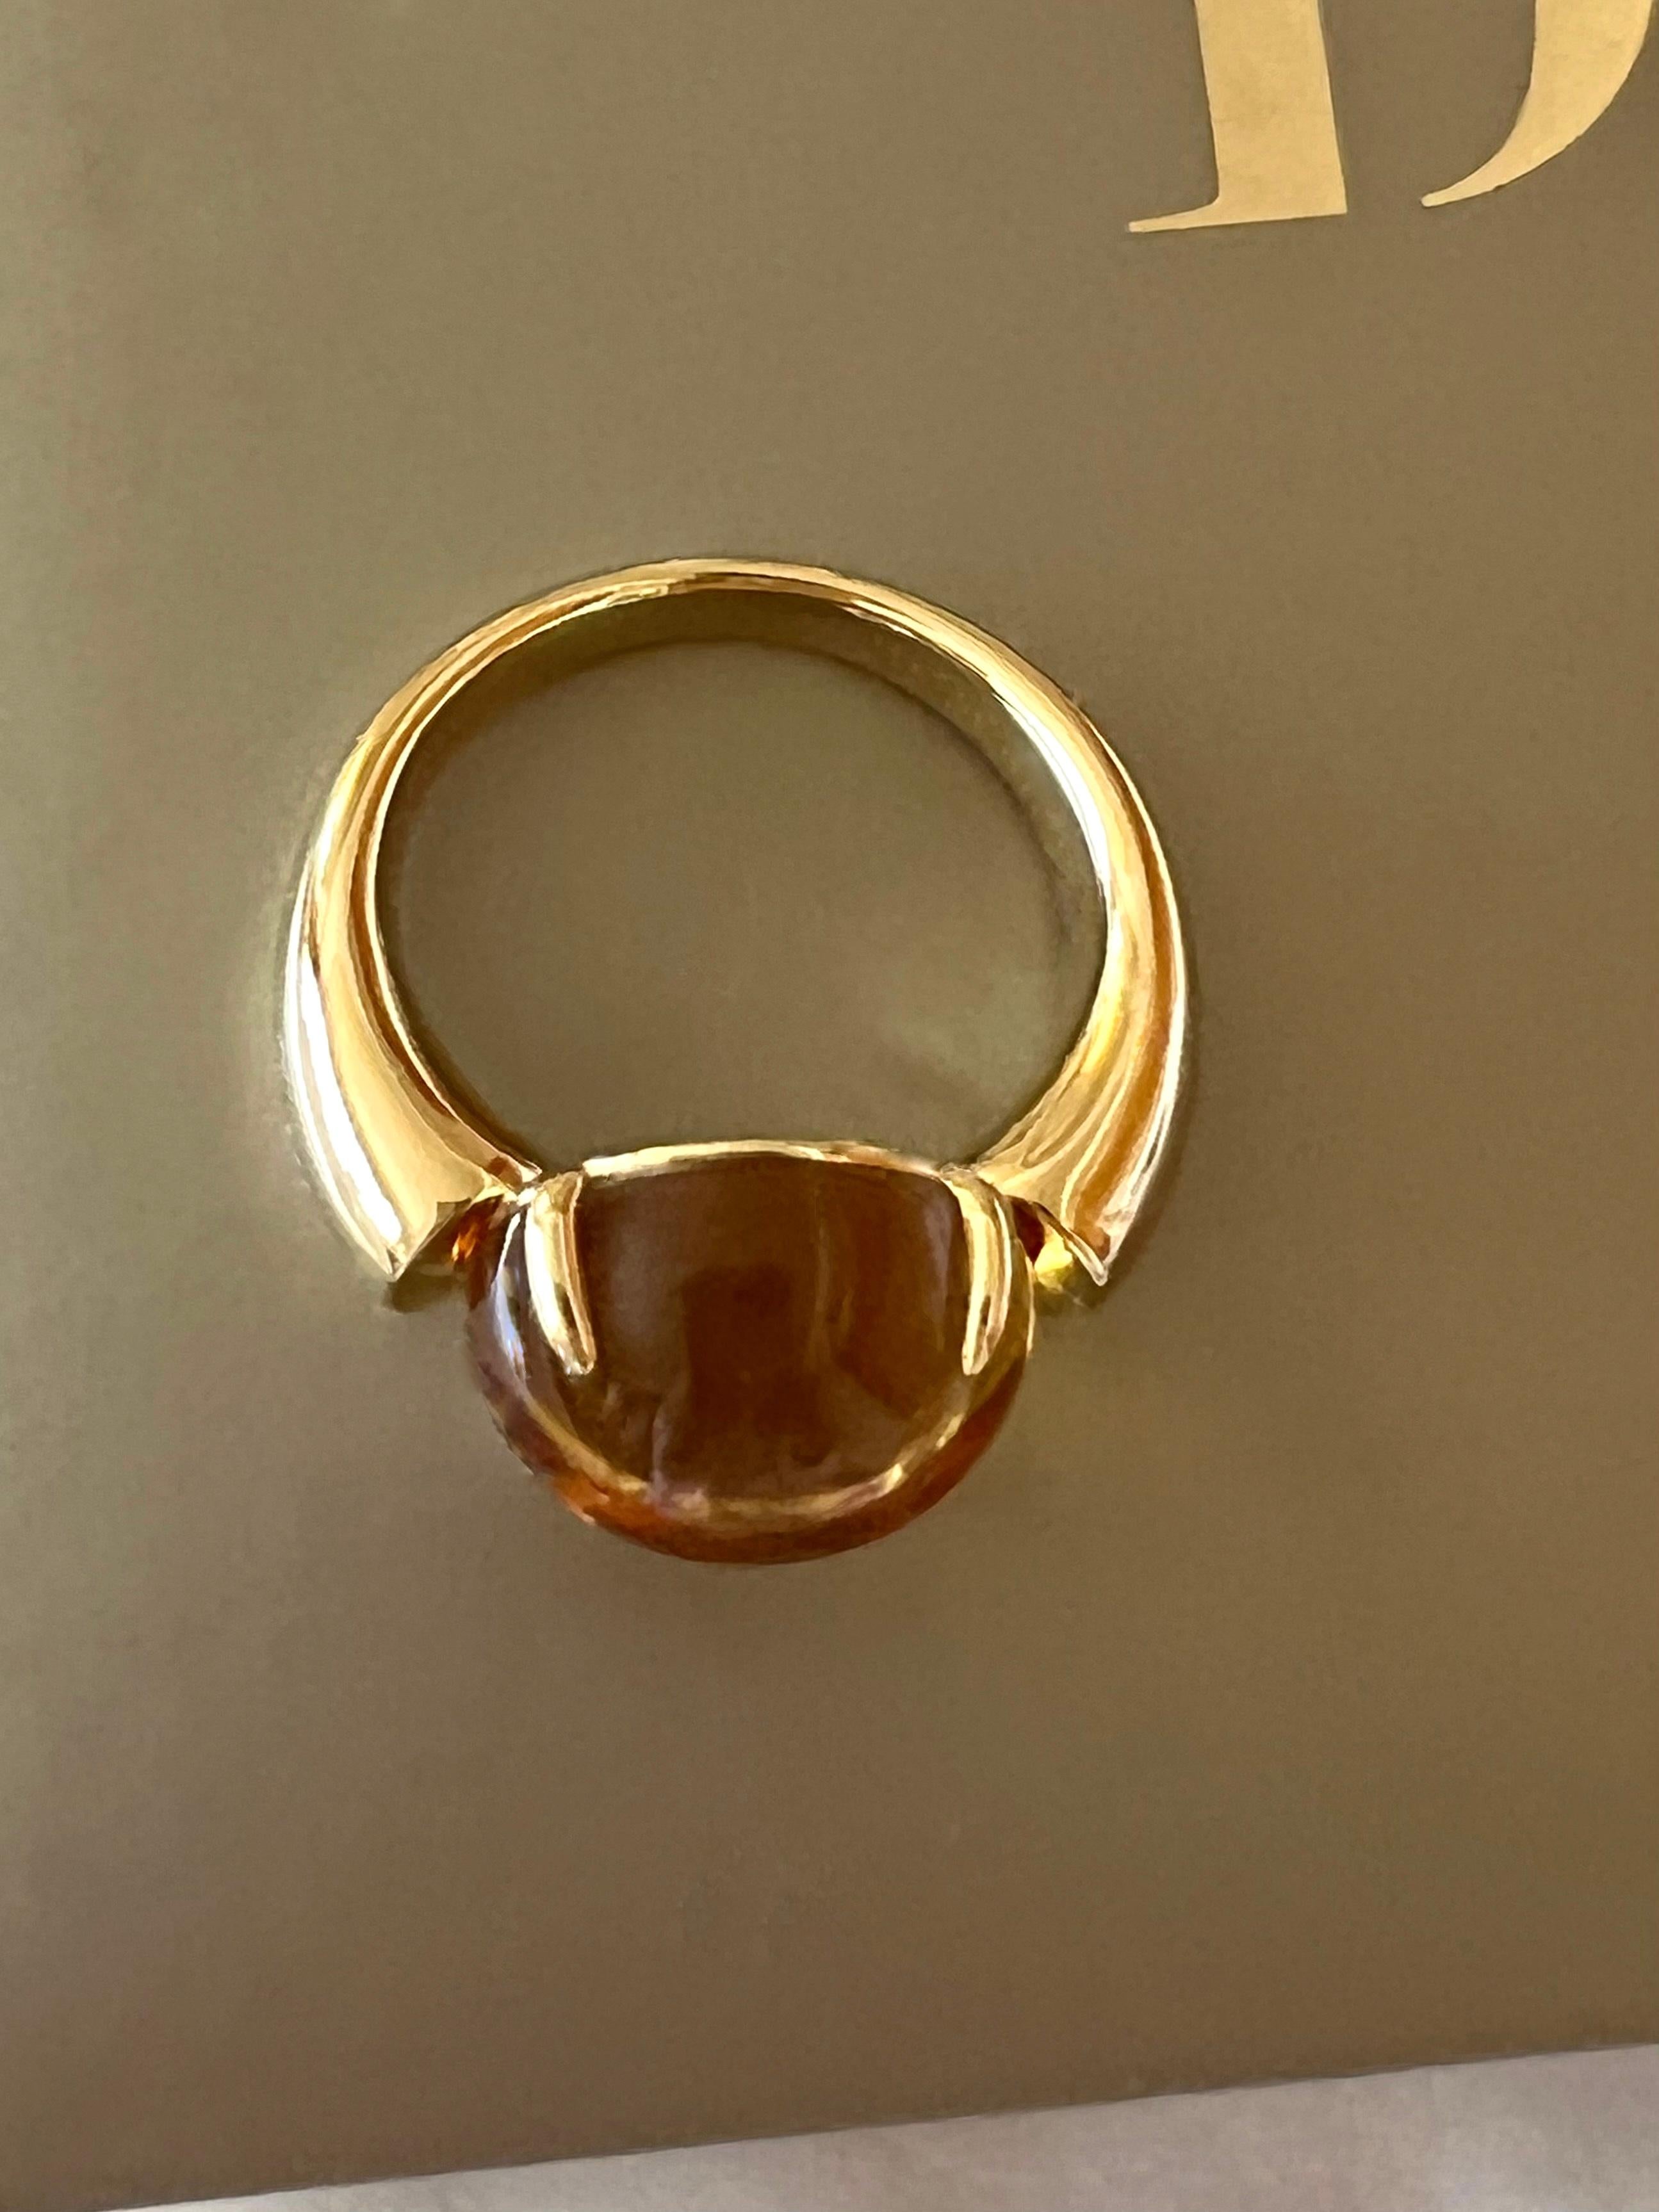 Cushion Cut 10 Carat Citrine Cabochon 18 Karat Yellow Gold Ring by D&A For Sale